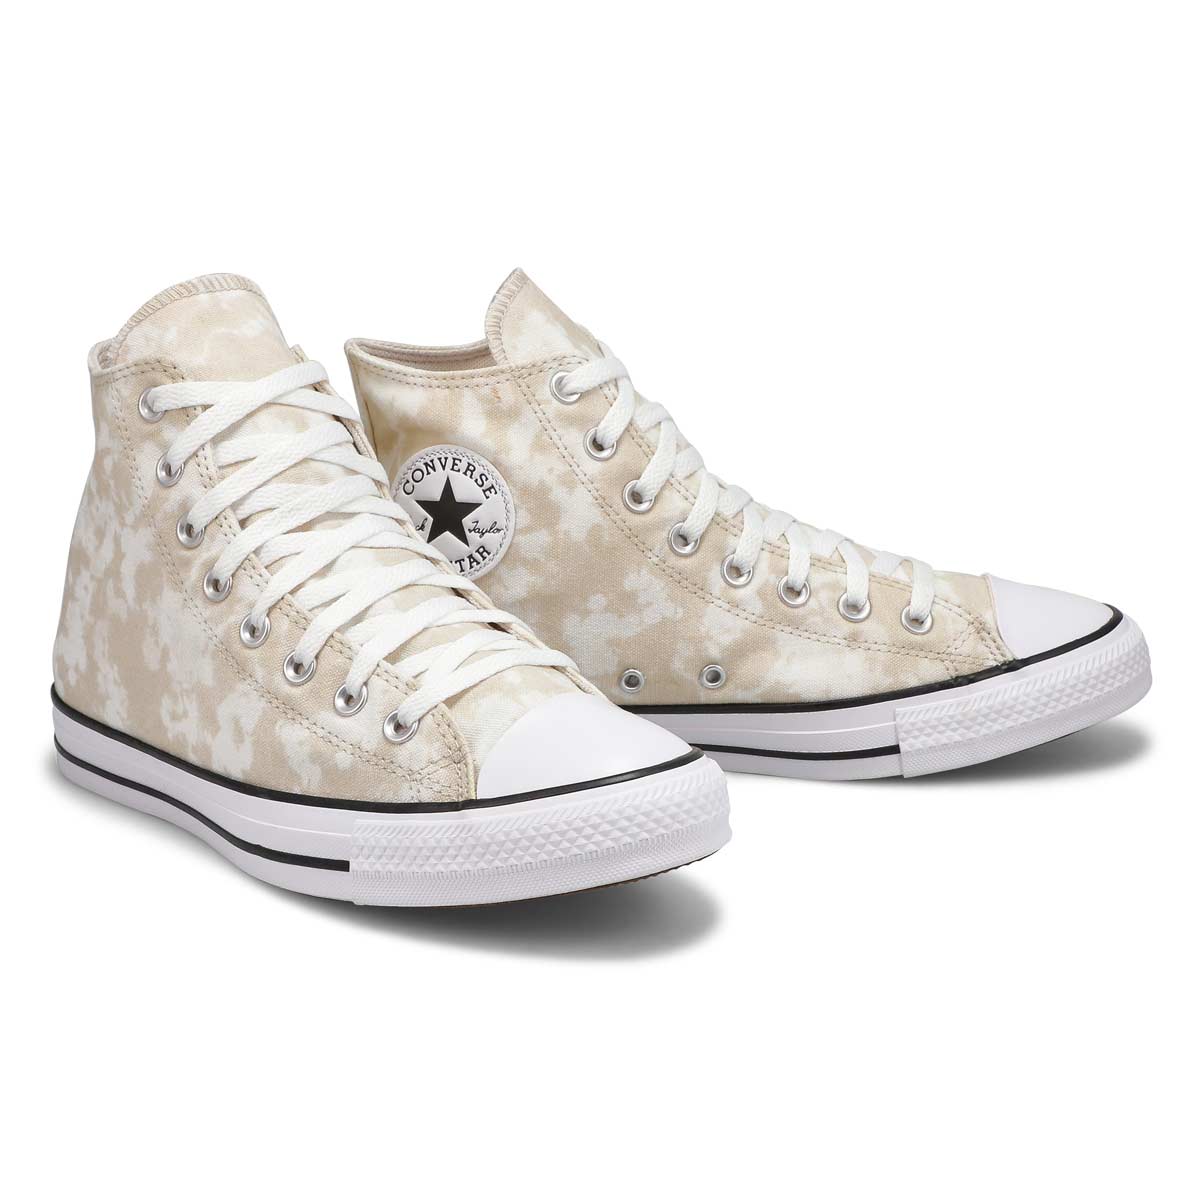 Men's CT All Star Soothing Craft Sneaker